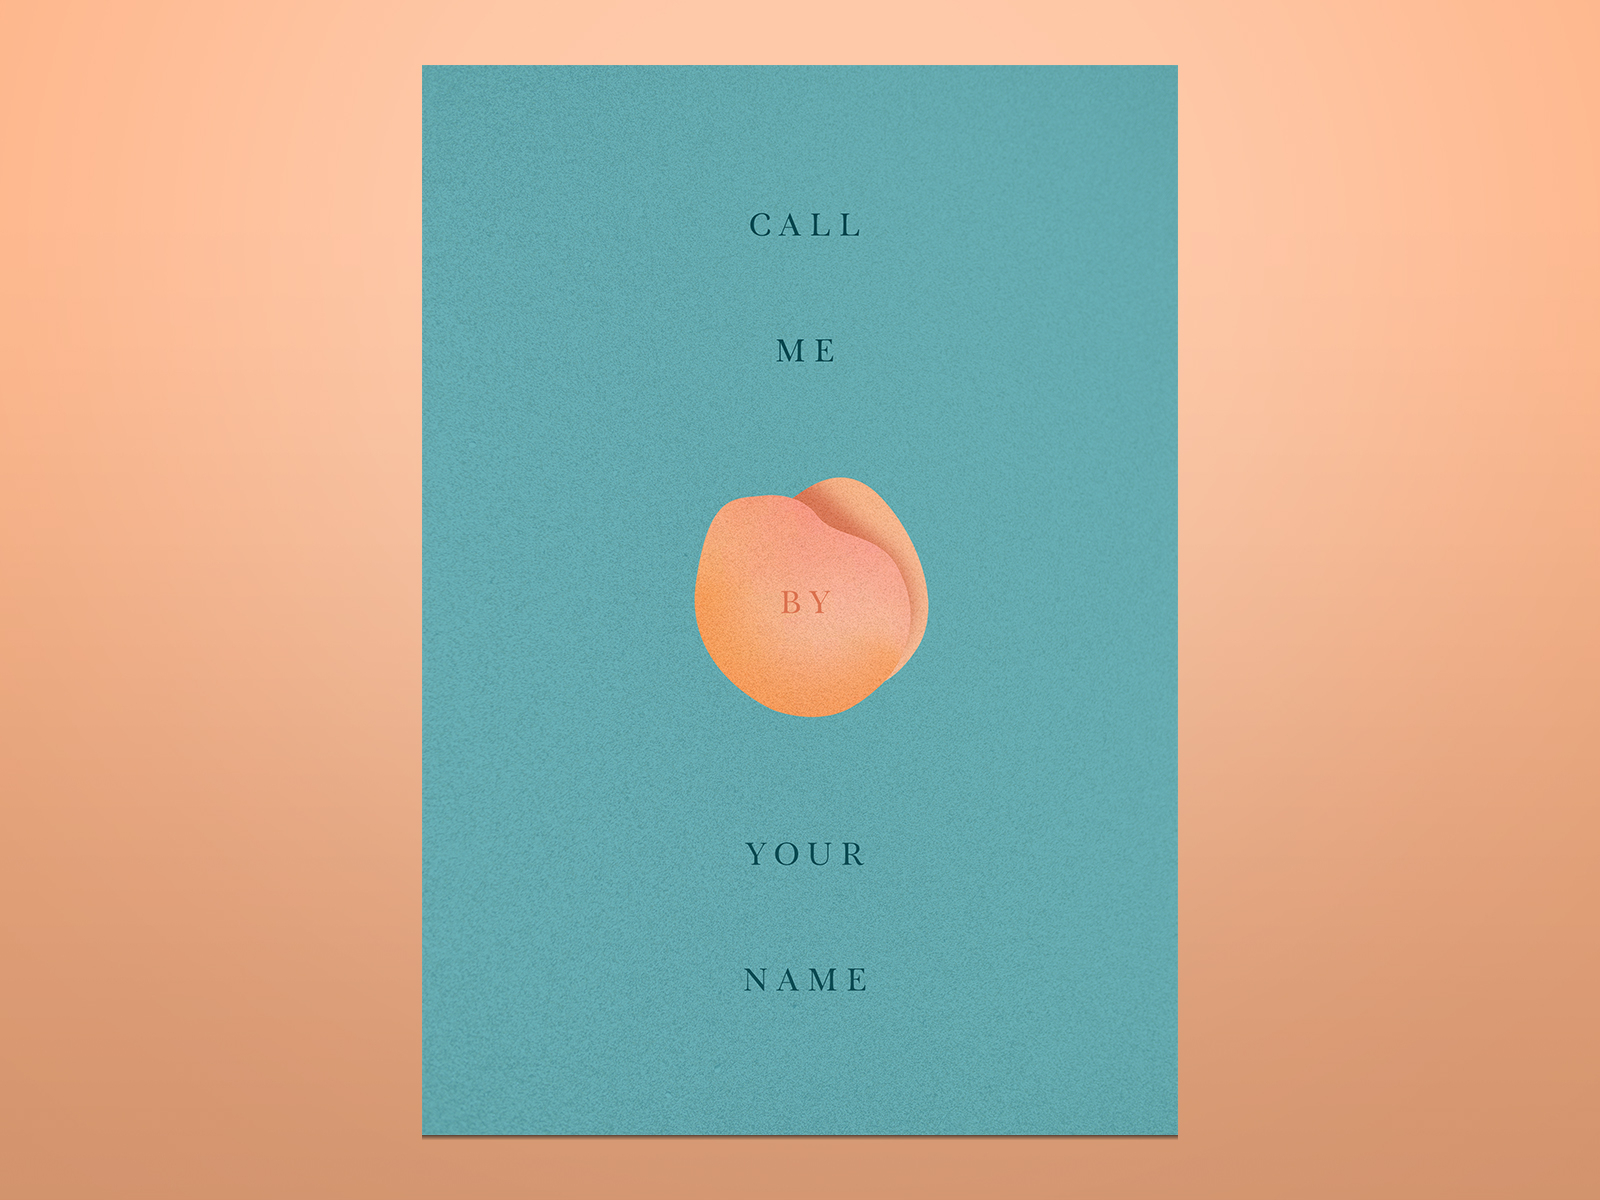 Call Me By Your Name By Jan Nemec On Dribbble